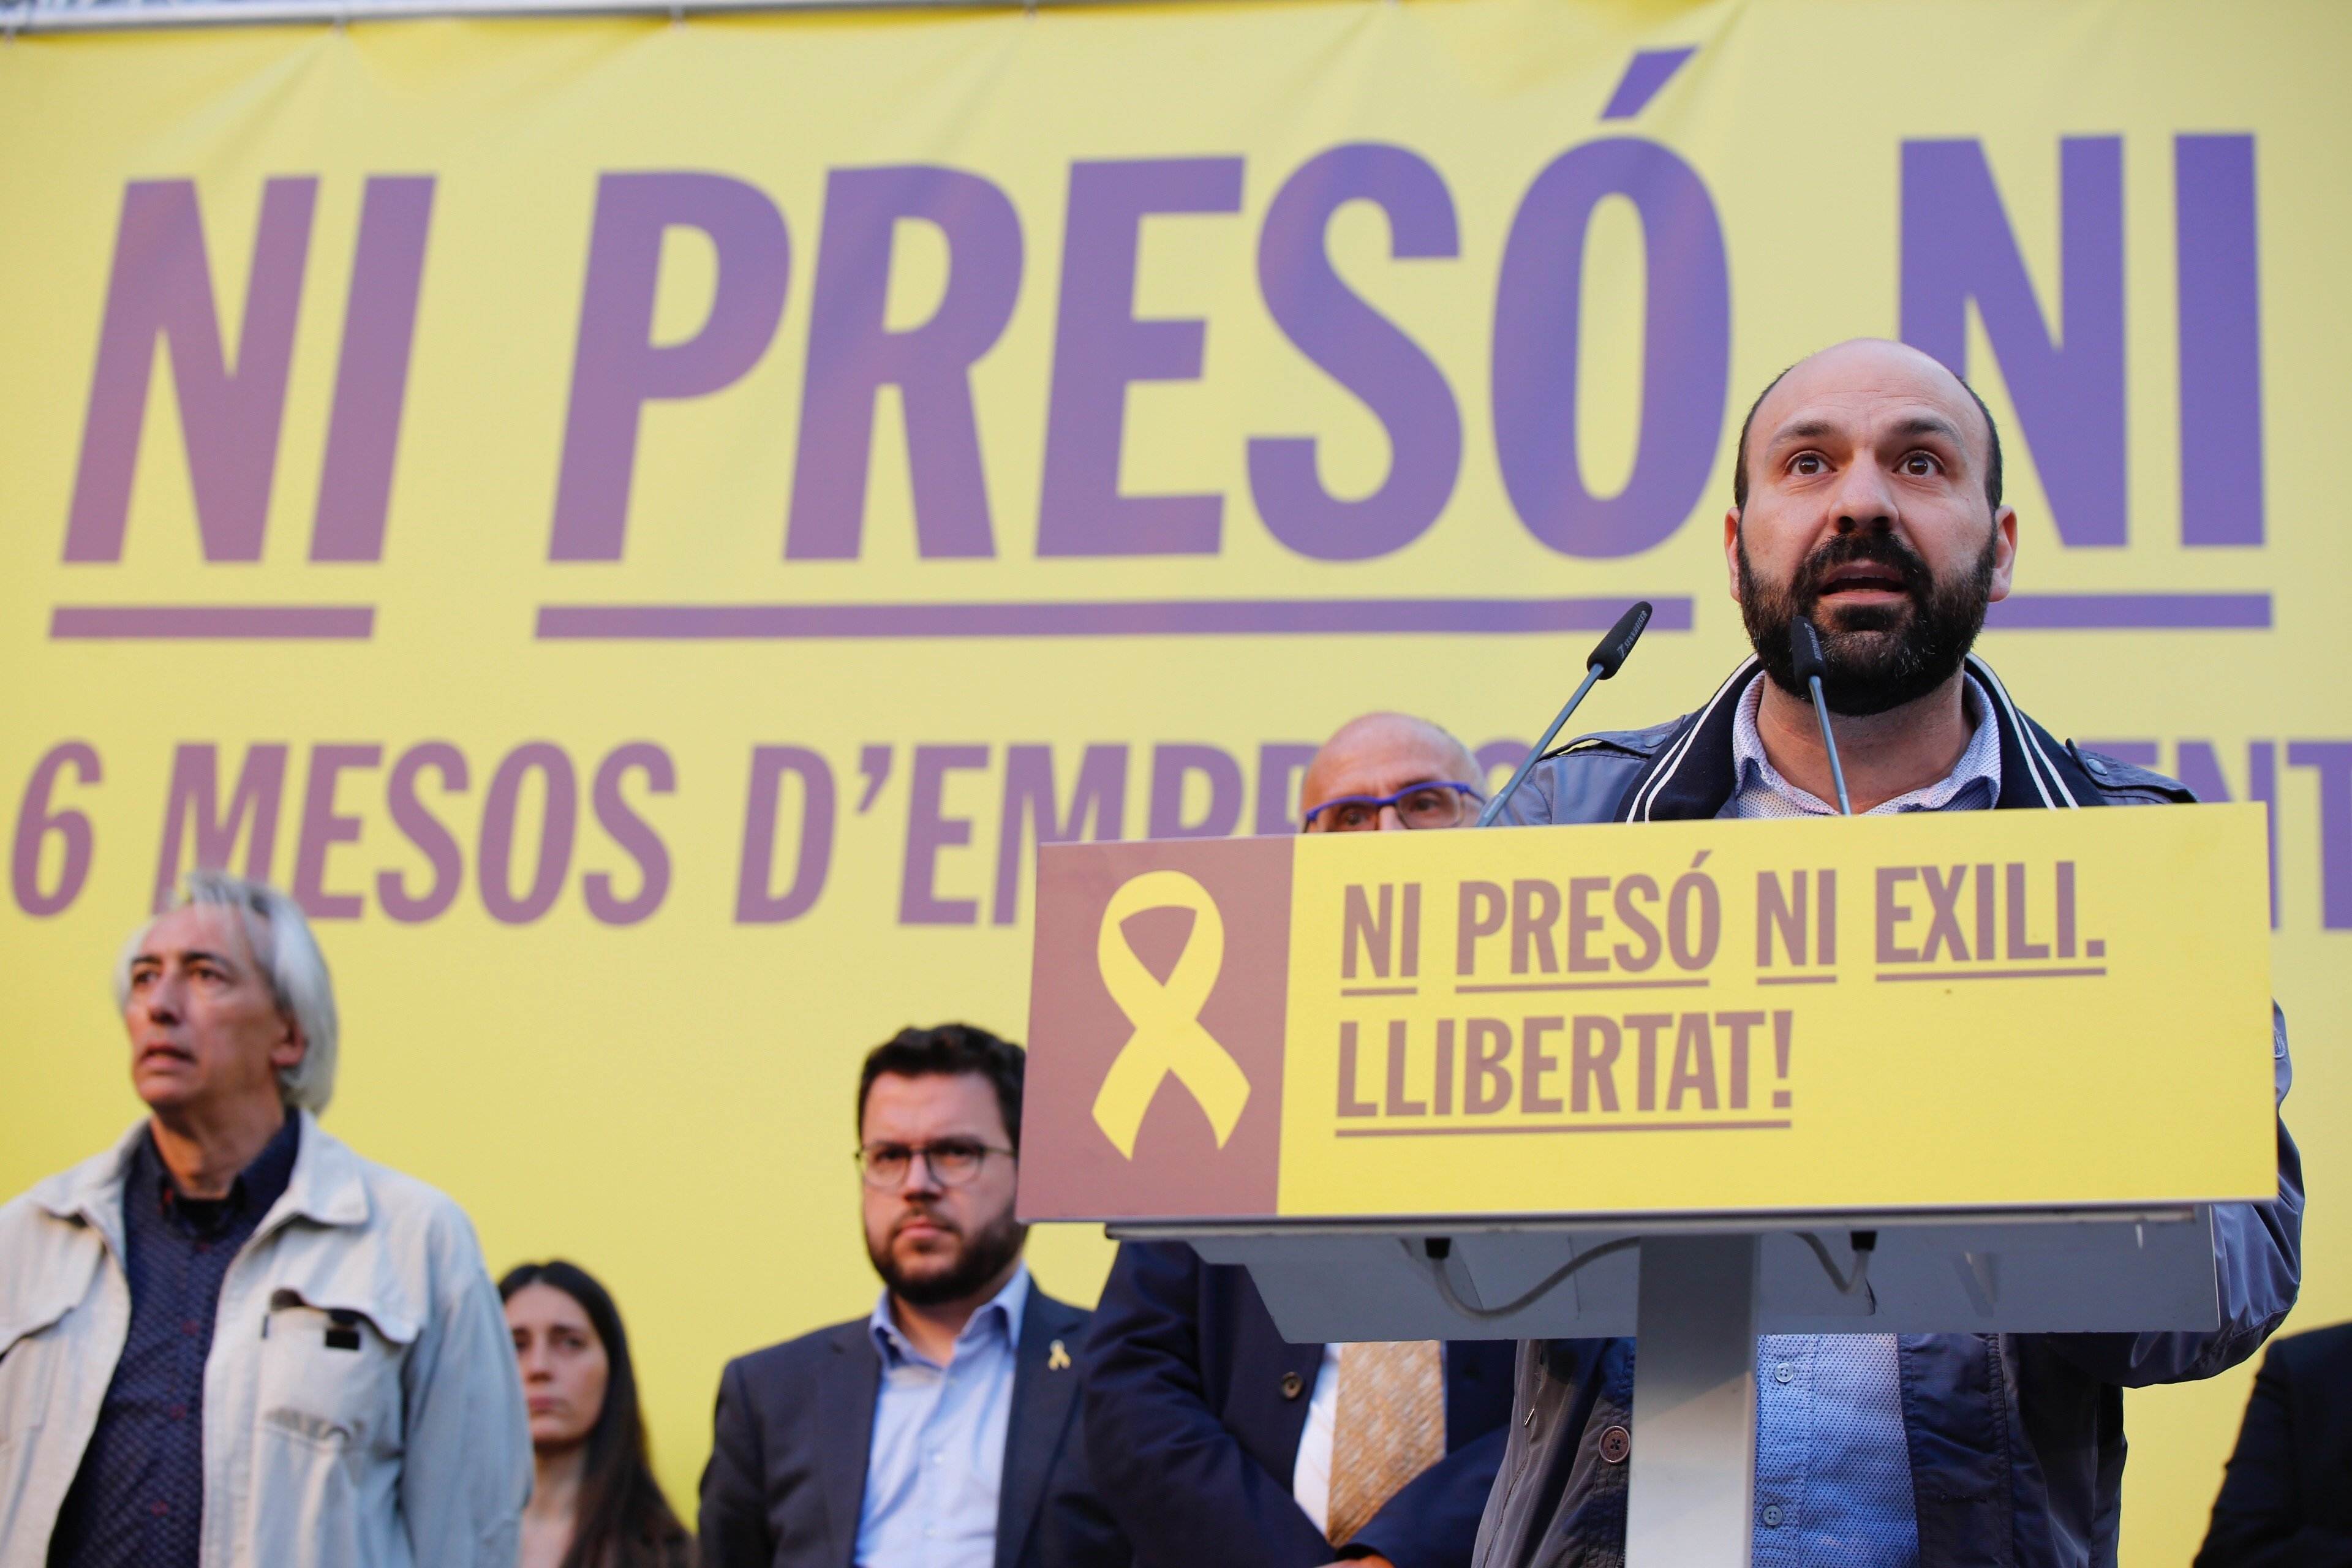 Spanish state confiscates 110,000 euros each from pro-independence organisations